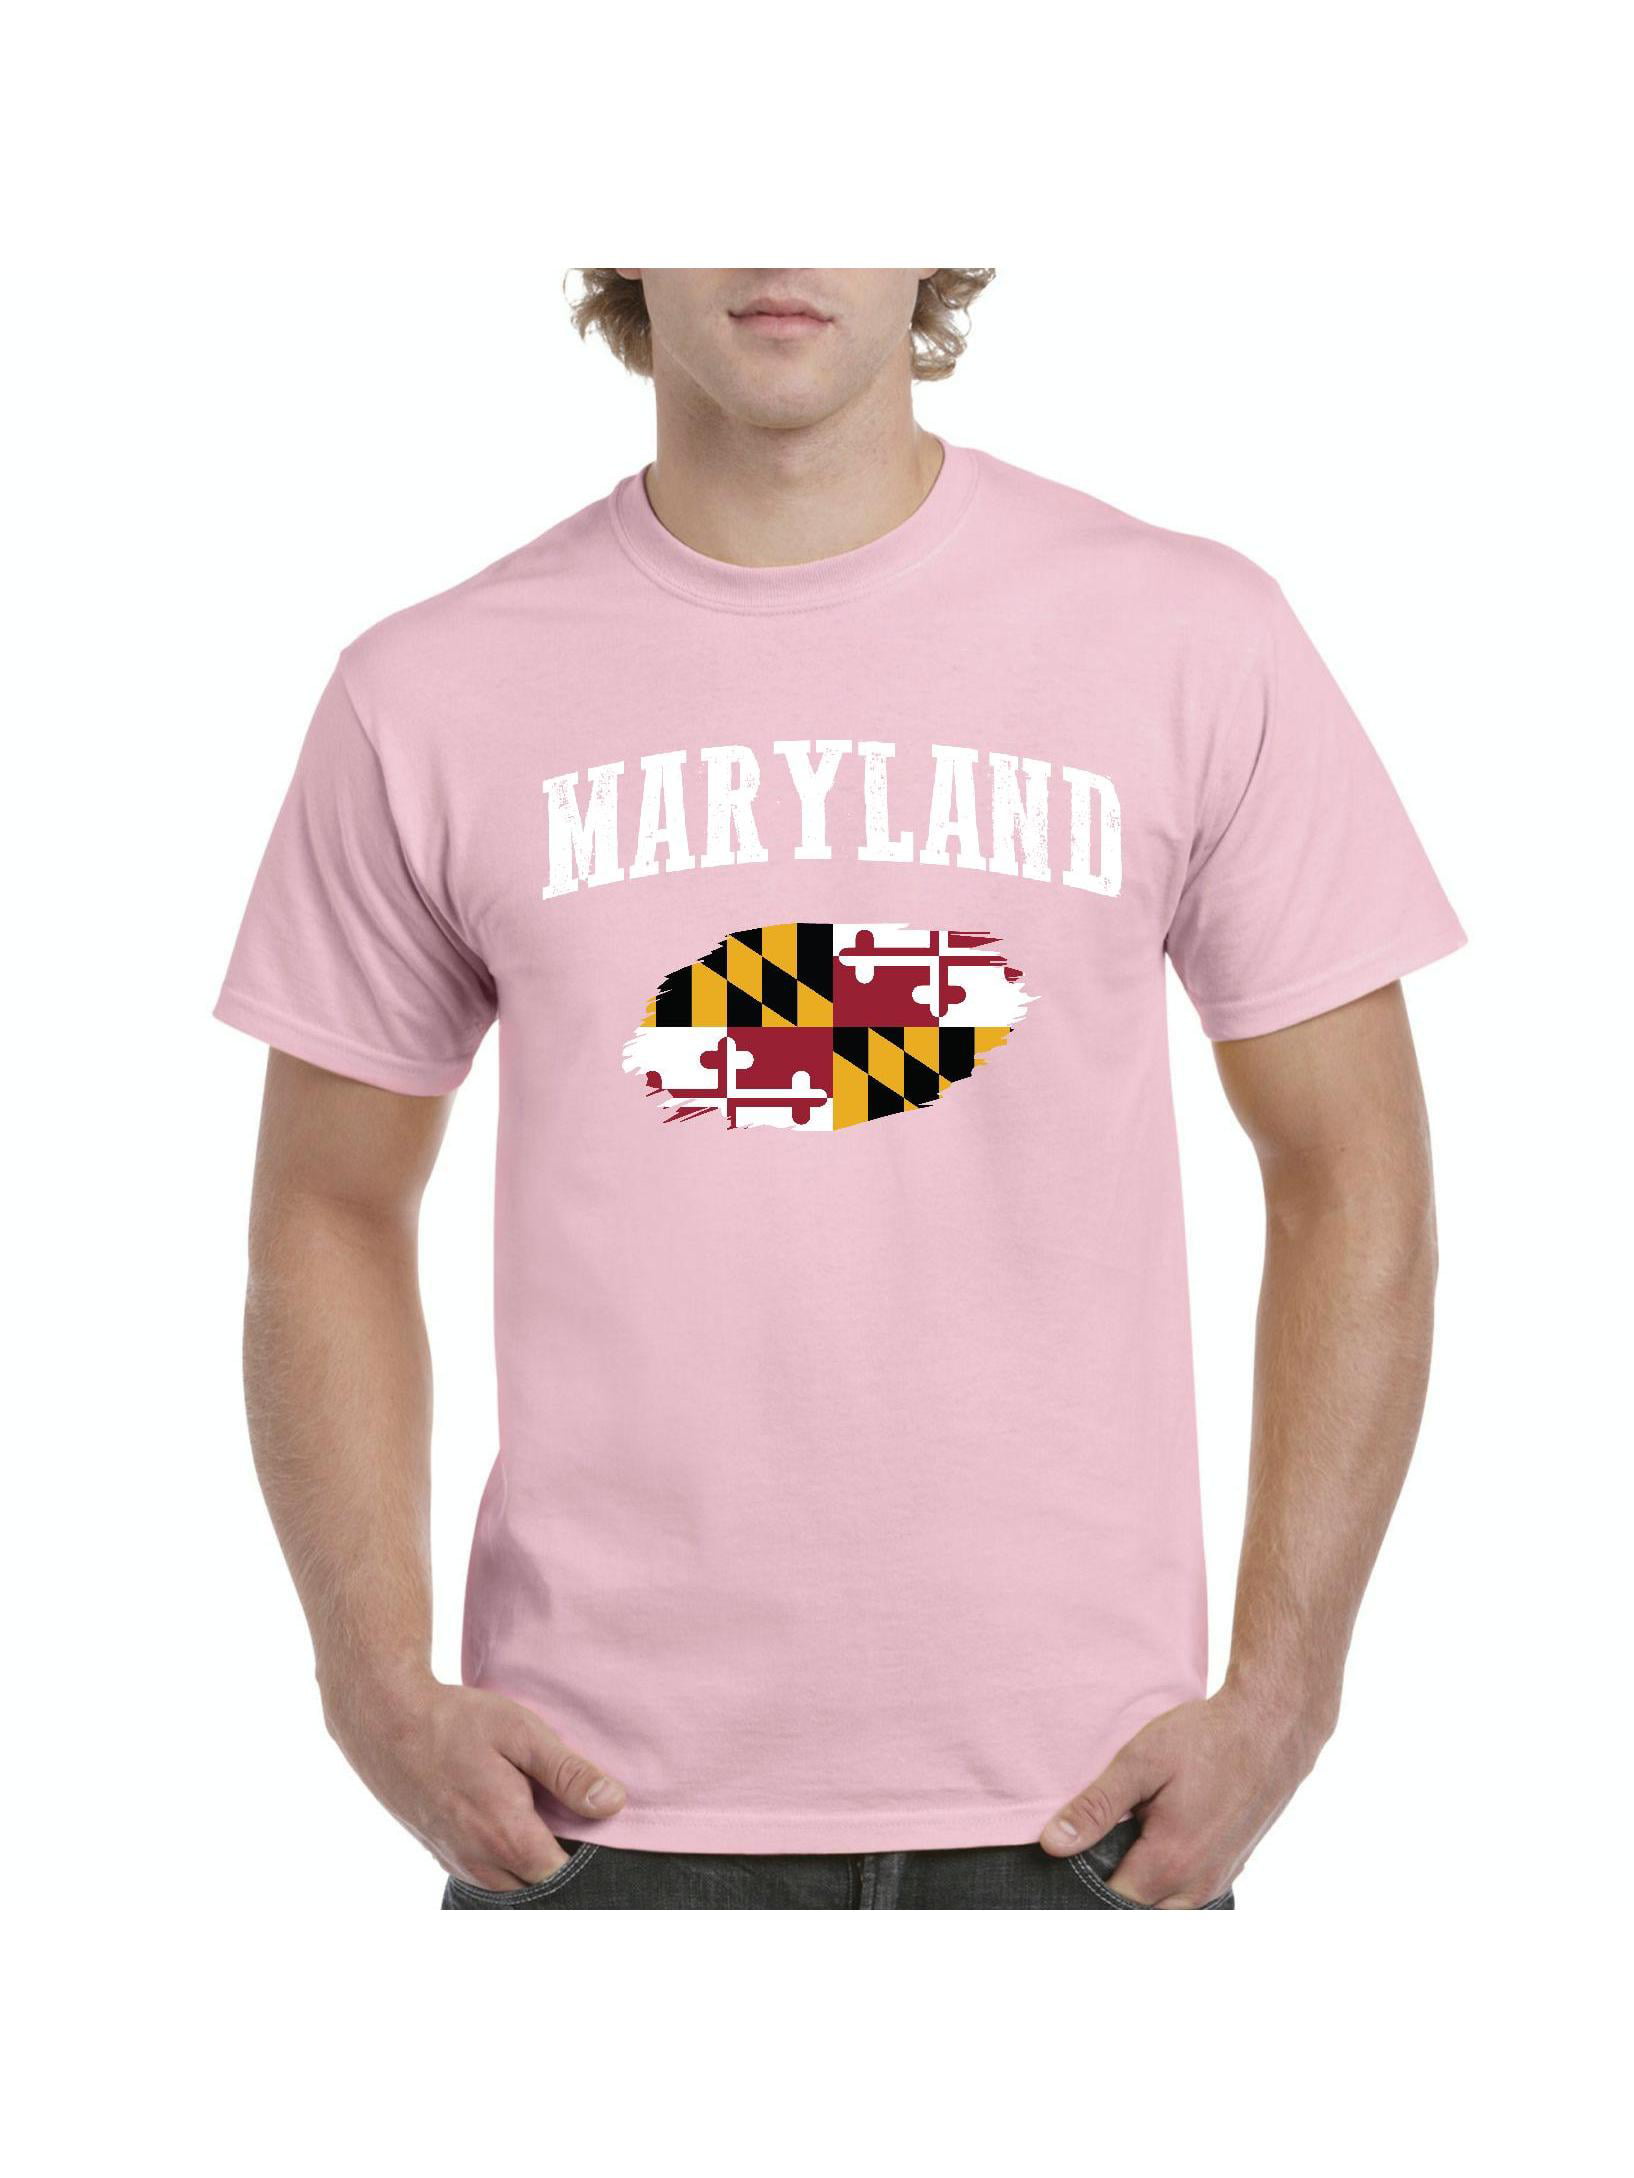 Hot New Maryland State Flag Women t shirt Crop Top Size S-3XL Free Shipping 